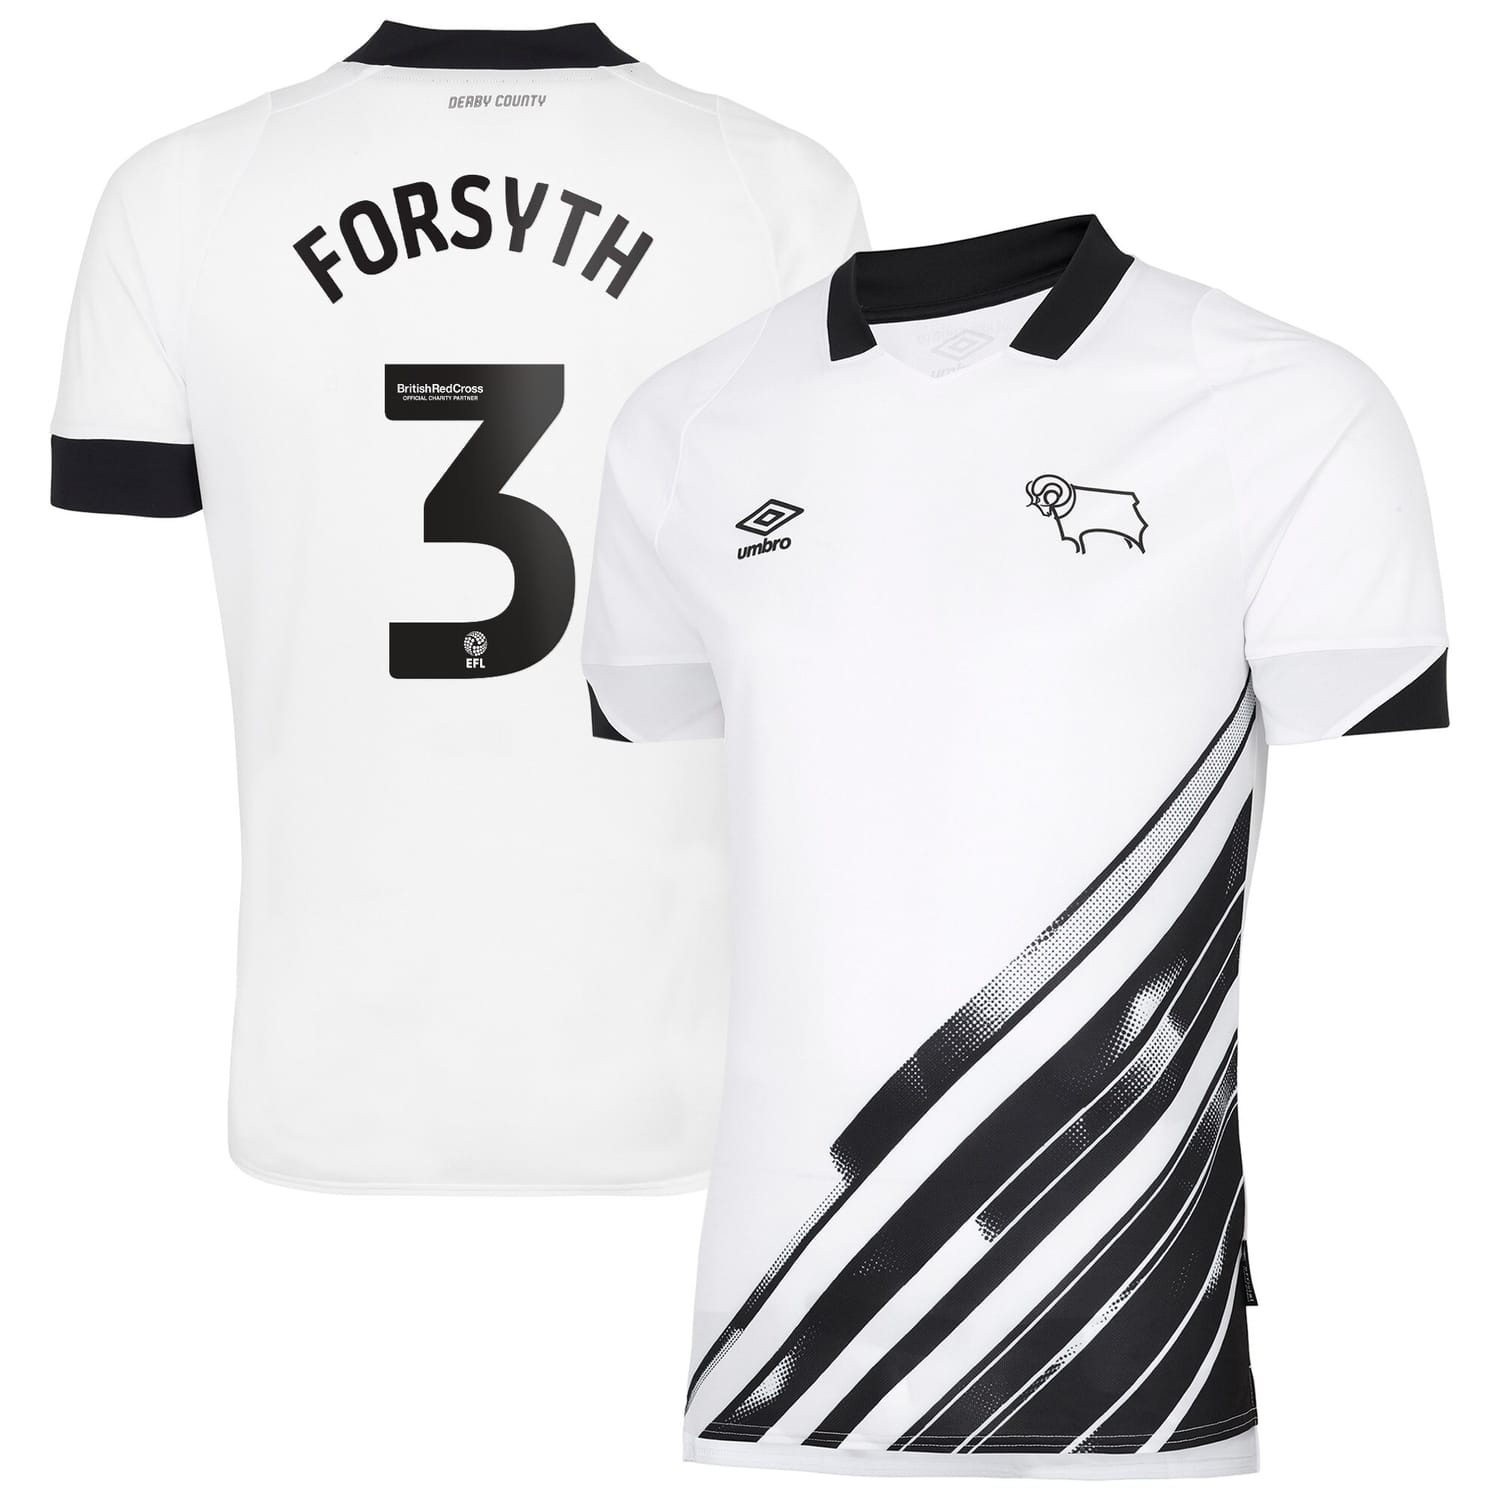 EFL League One Derby County Home Jersey Shirt 2022-23 player Forsyth 3 printing for Men